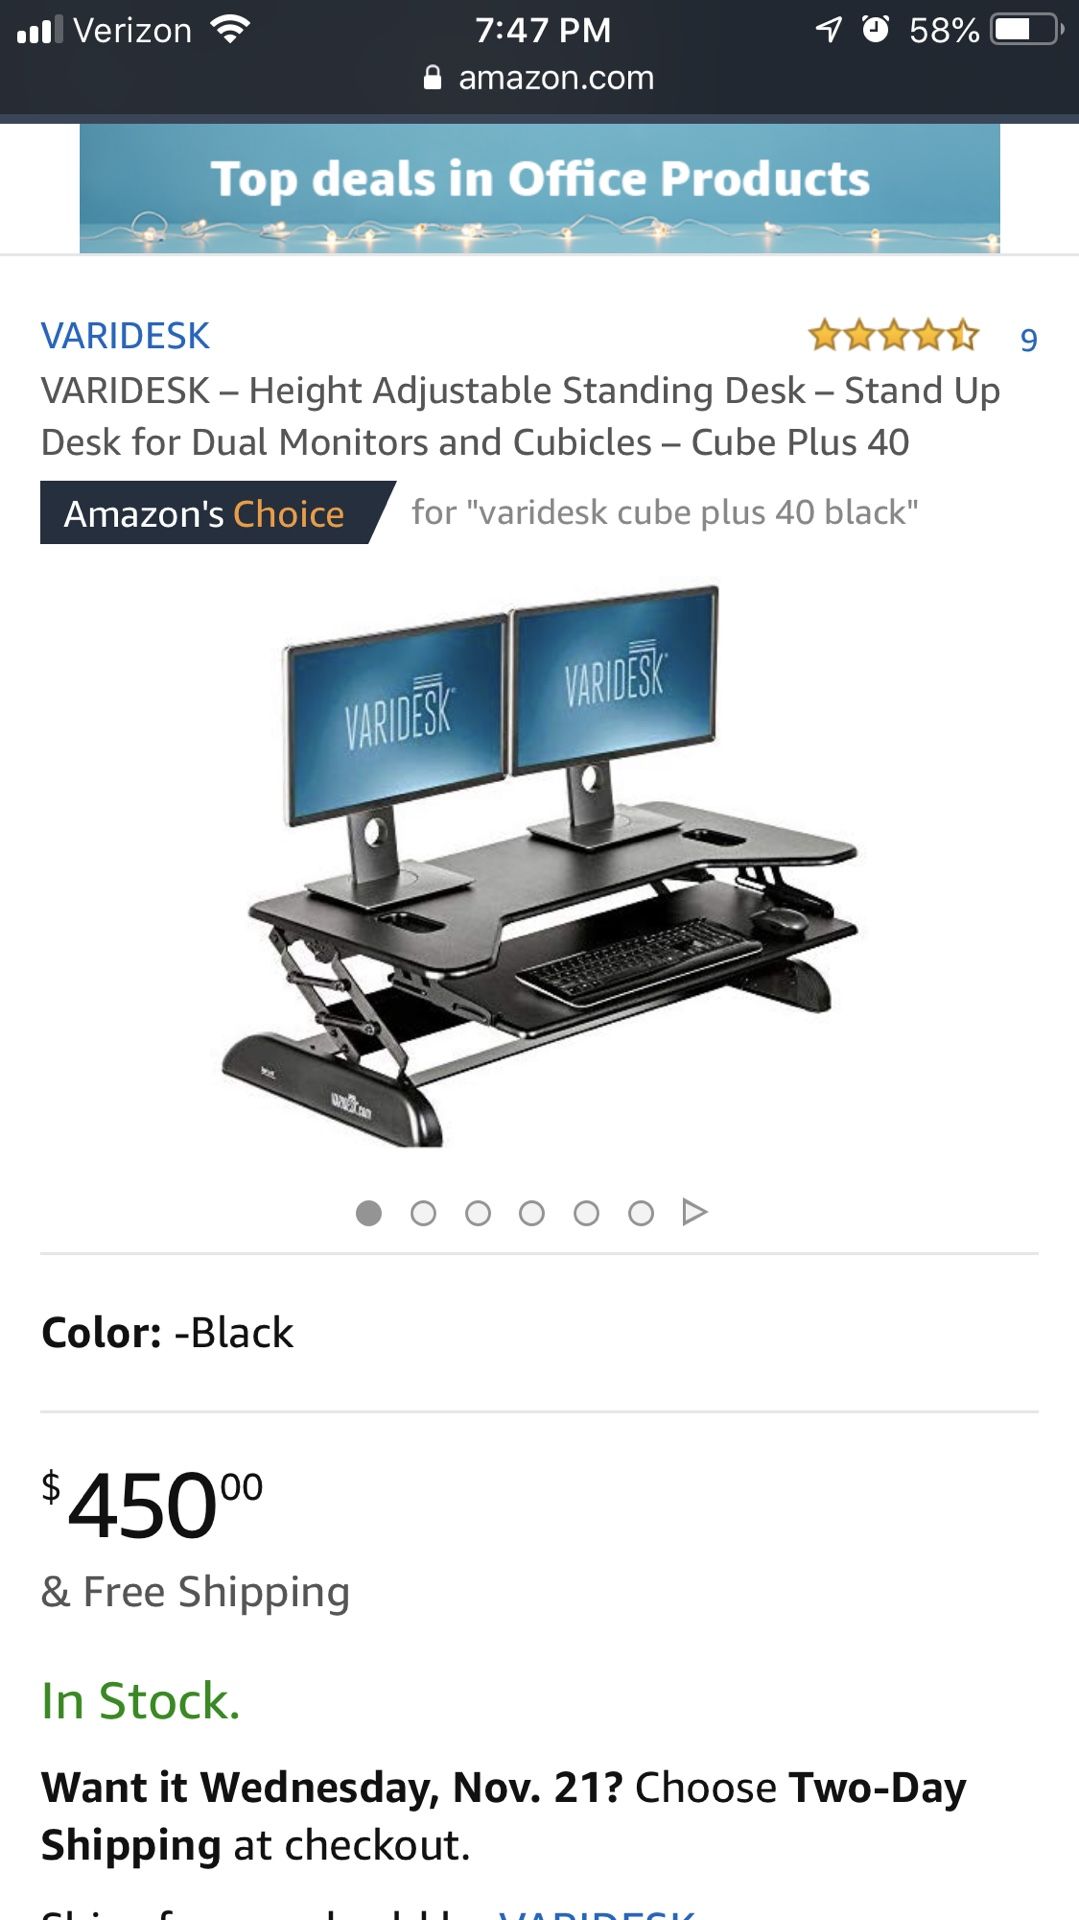 VARIDESK – Height Adjustable Standing Desk – Stand Up Desk for Dual Monitors and Cubicles – Cube Plus 40